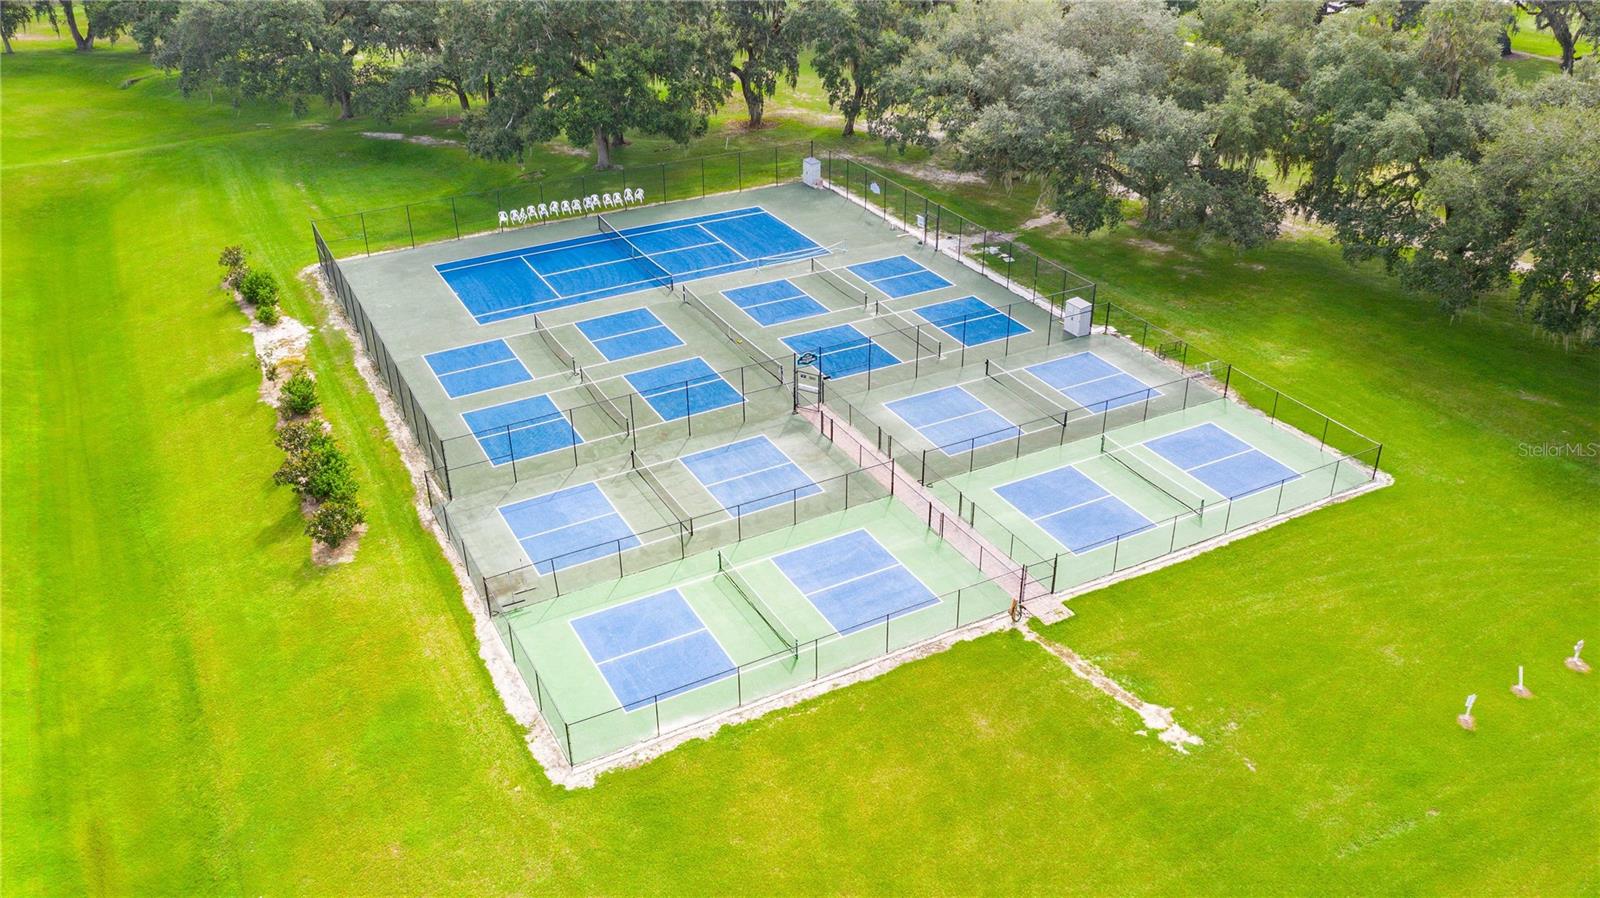 Community has pickleball and tennis area.